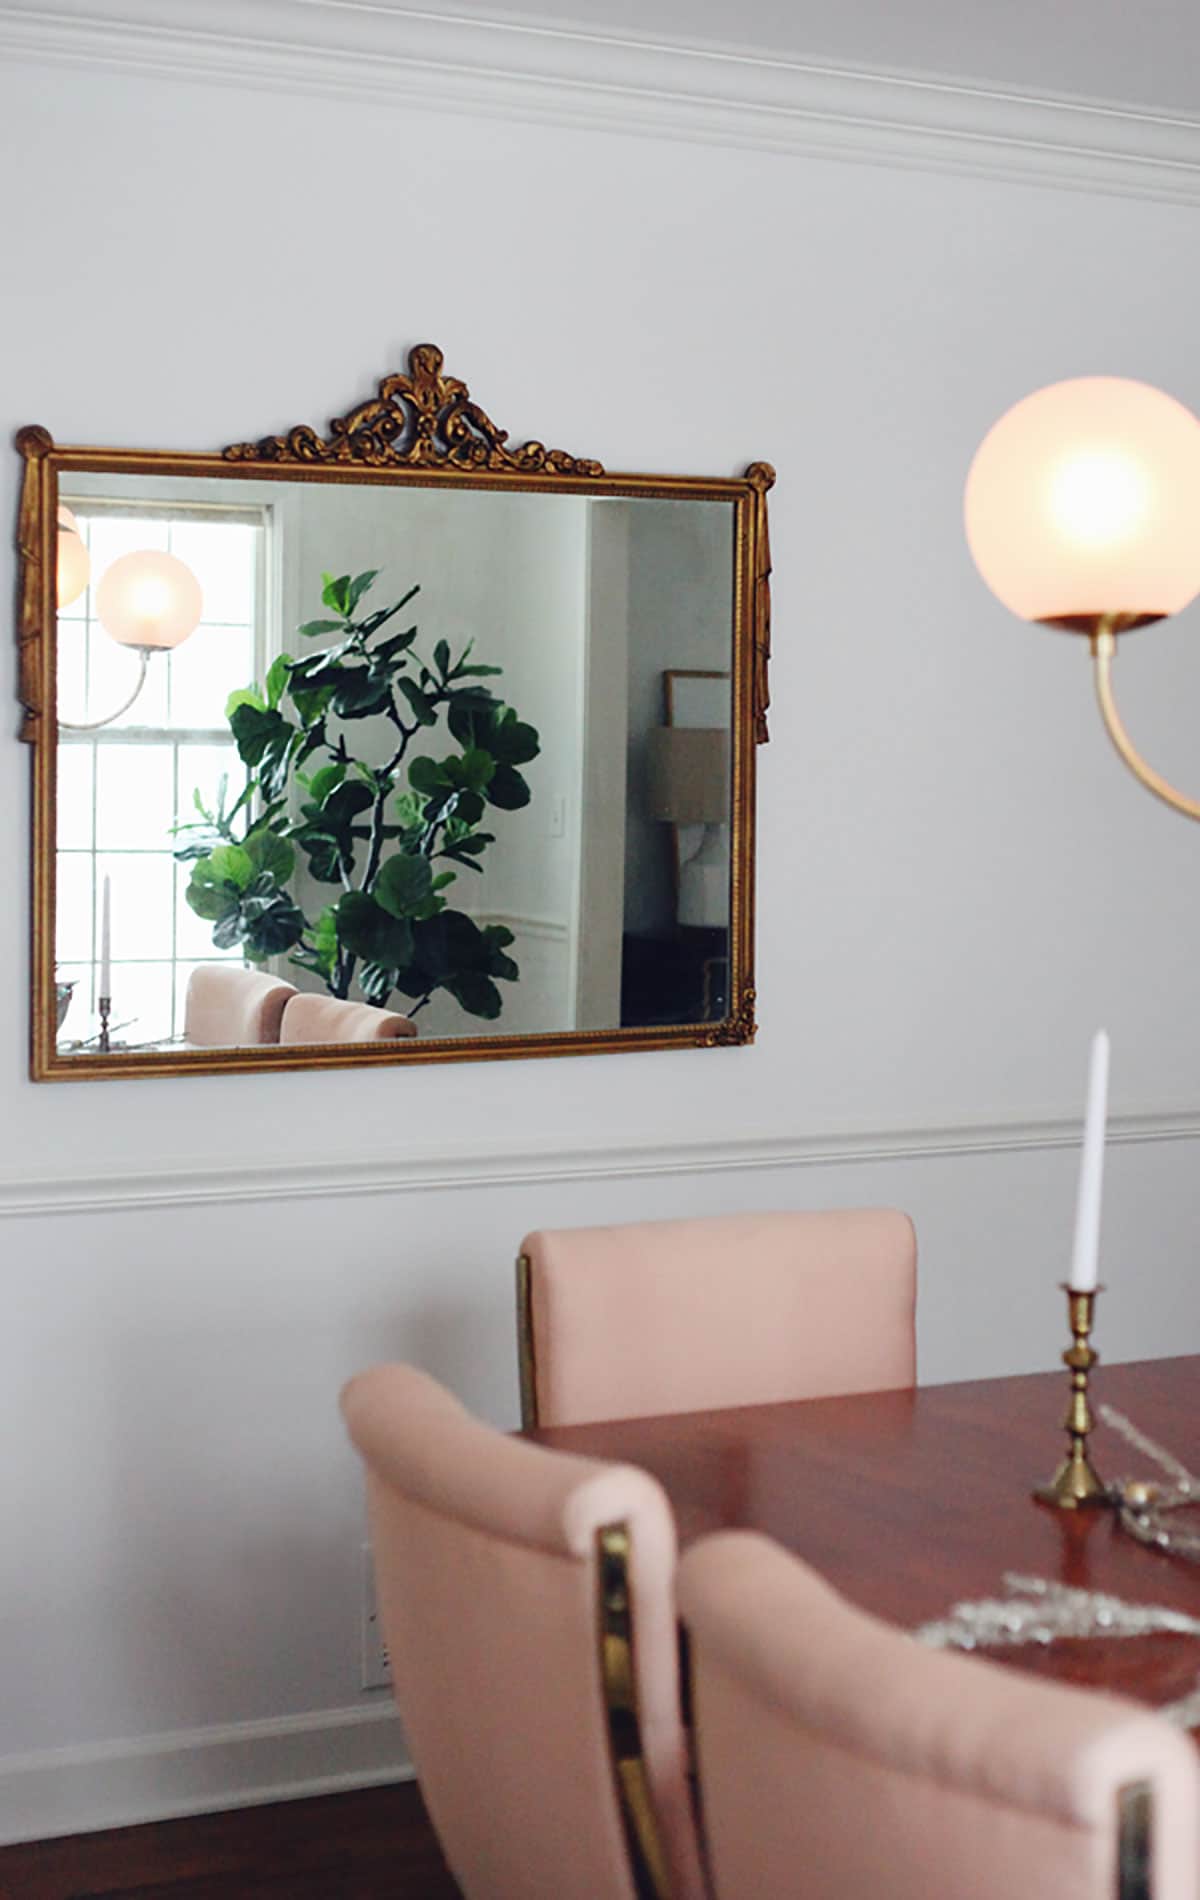 blogger holiday home tour - dining room decor with hollywood regency mirror